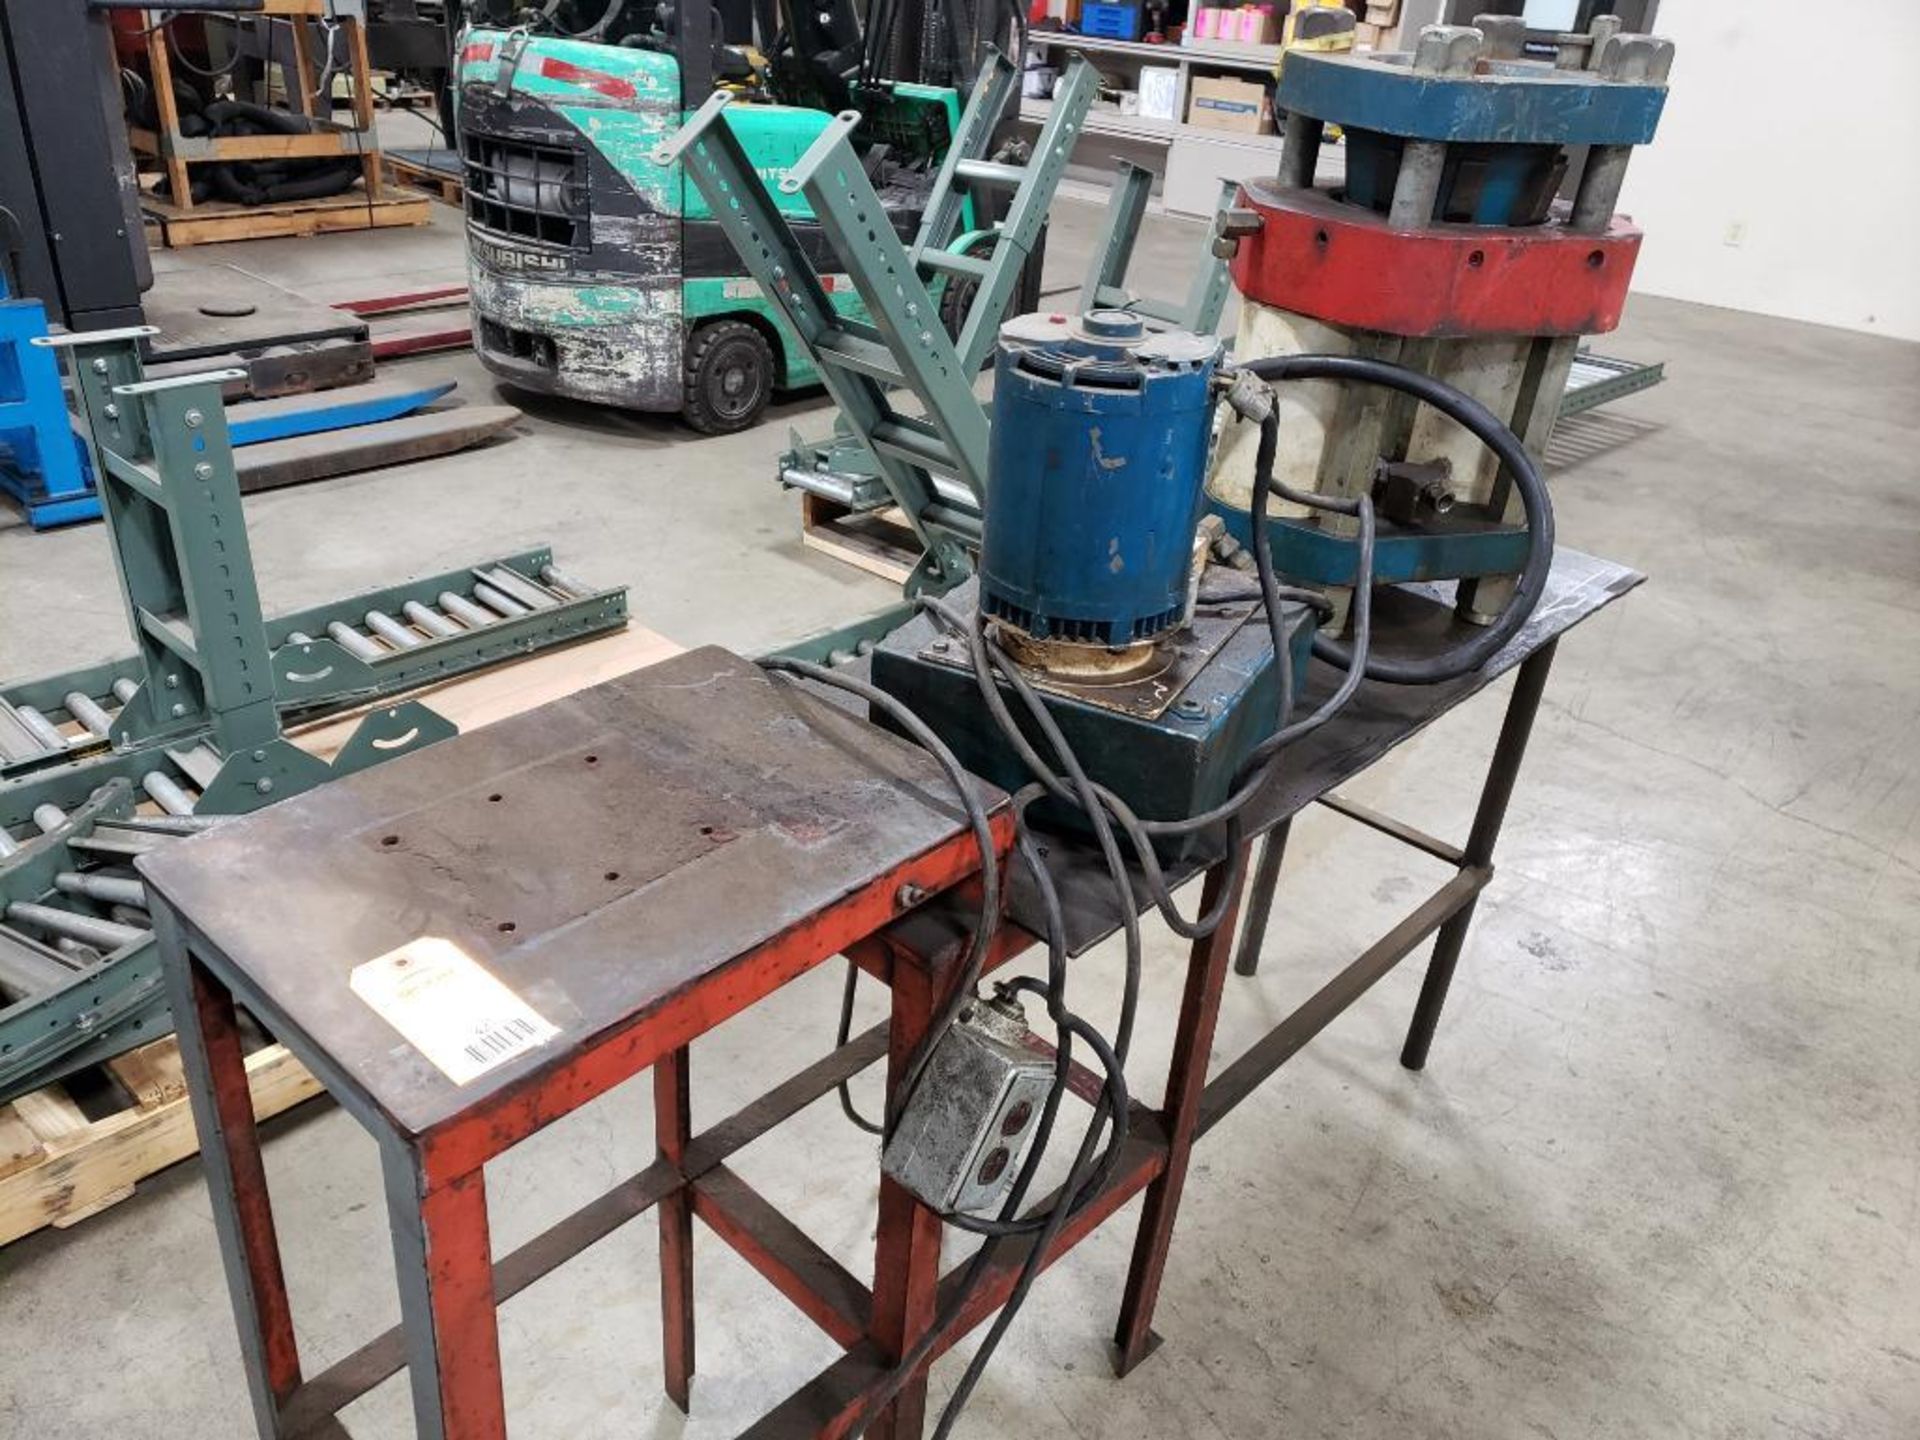 Hydraulic crimper station with hydraulic power pack. Includes steel table.